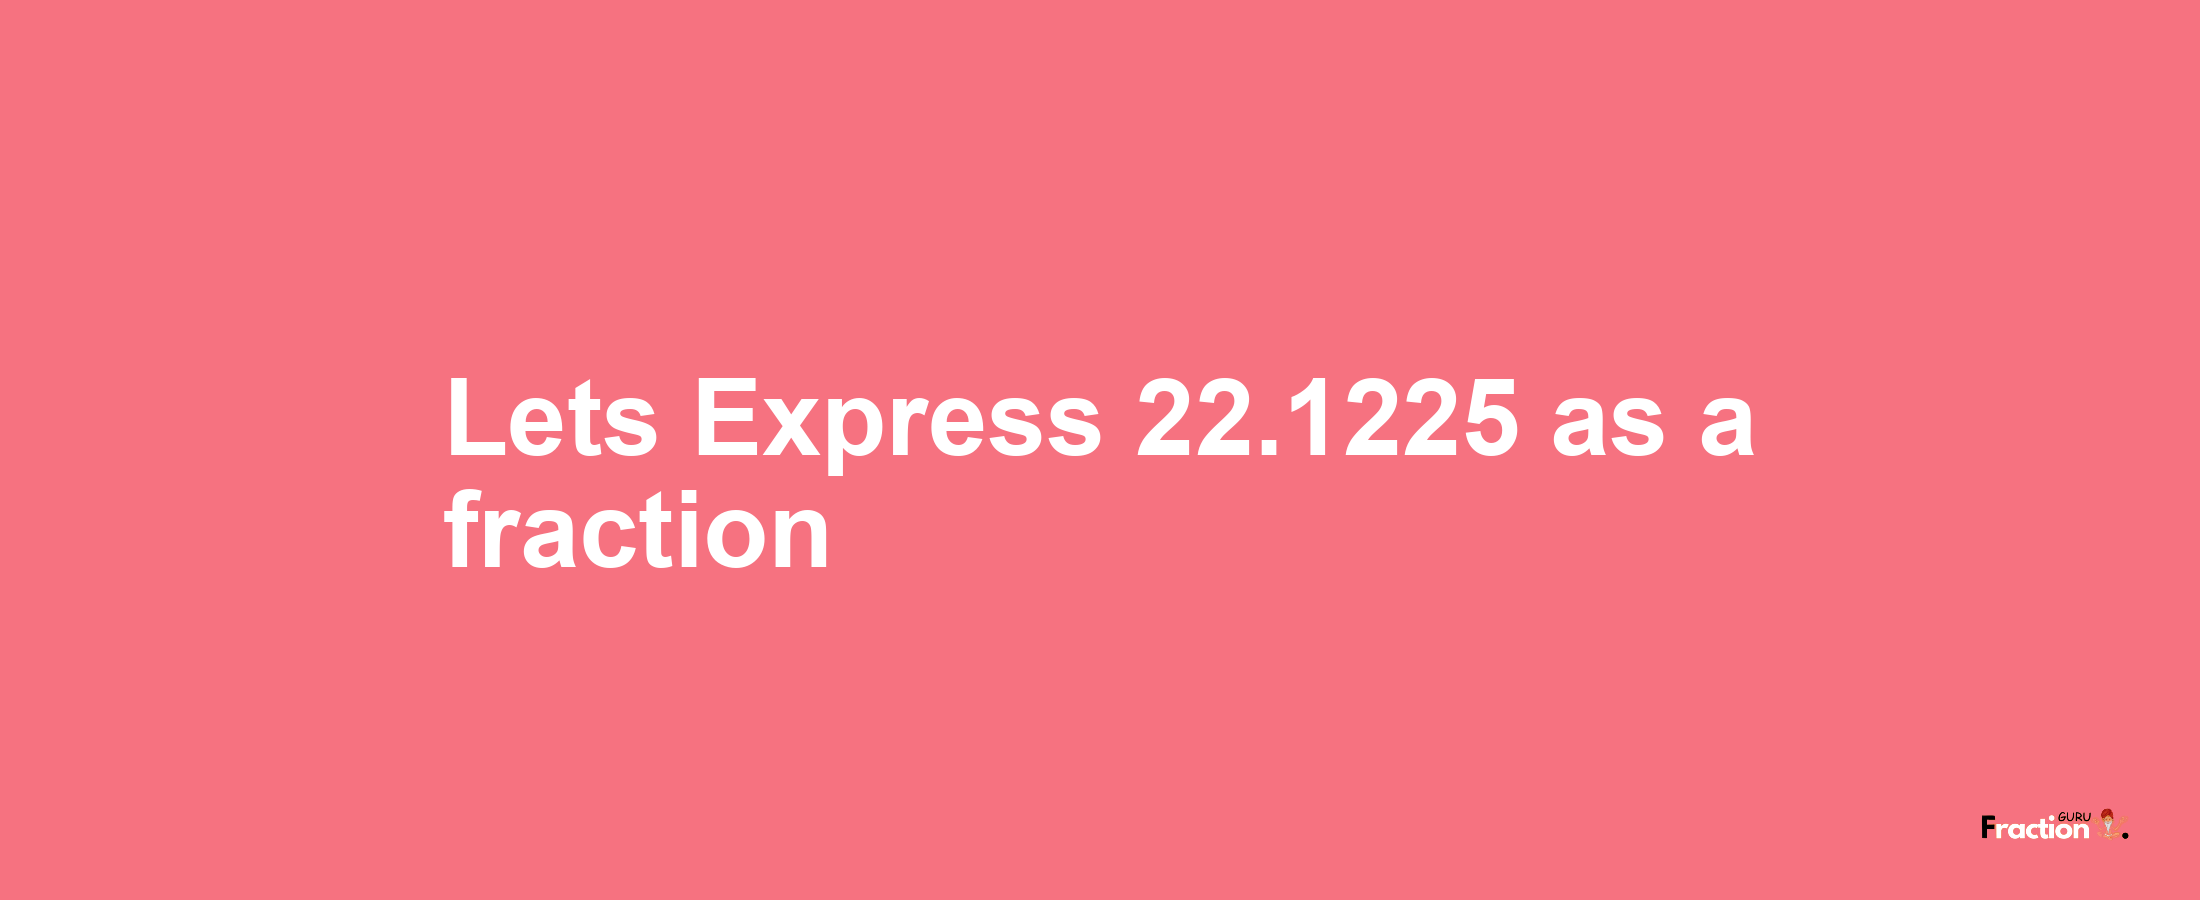 Lets Express 22.1225 as afraction